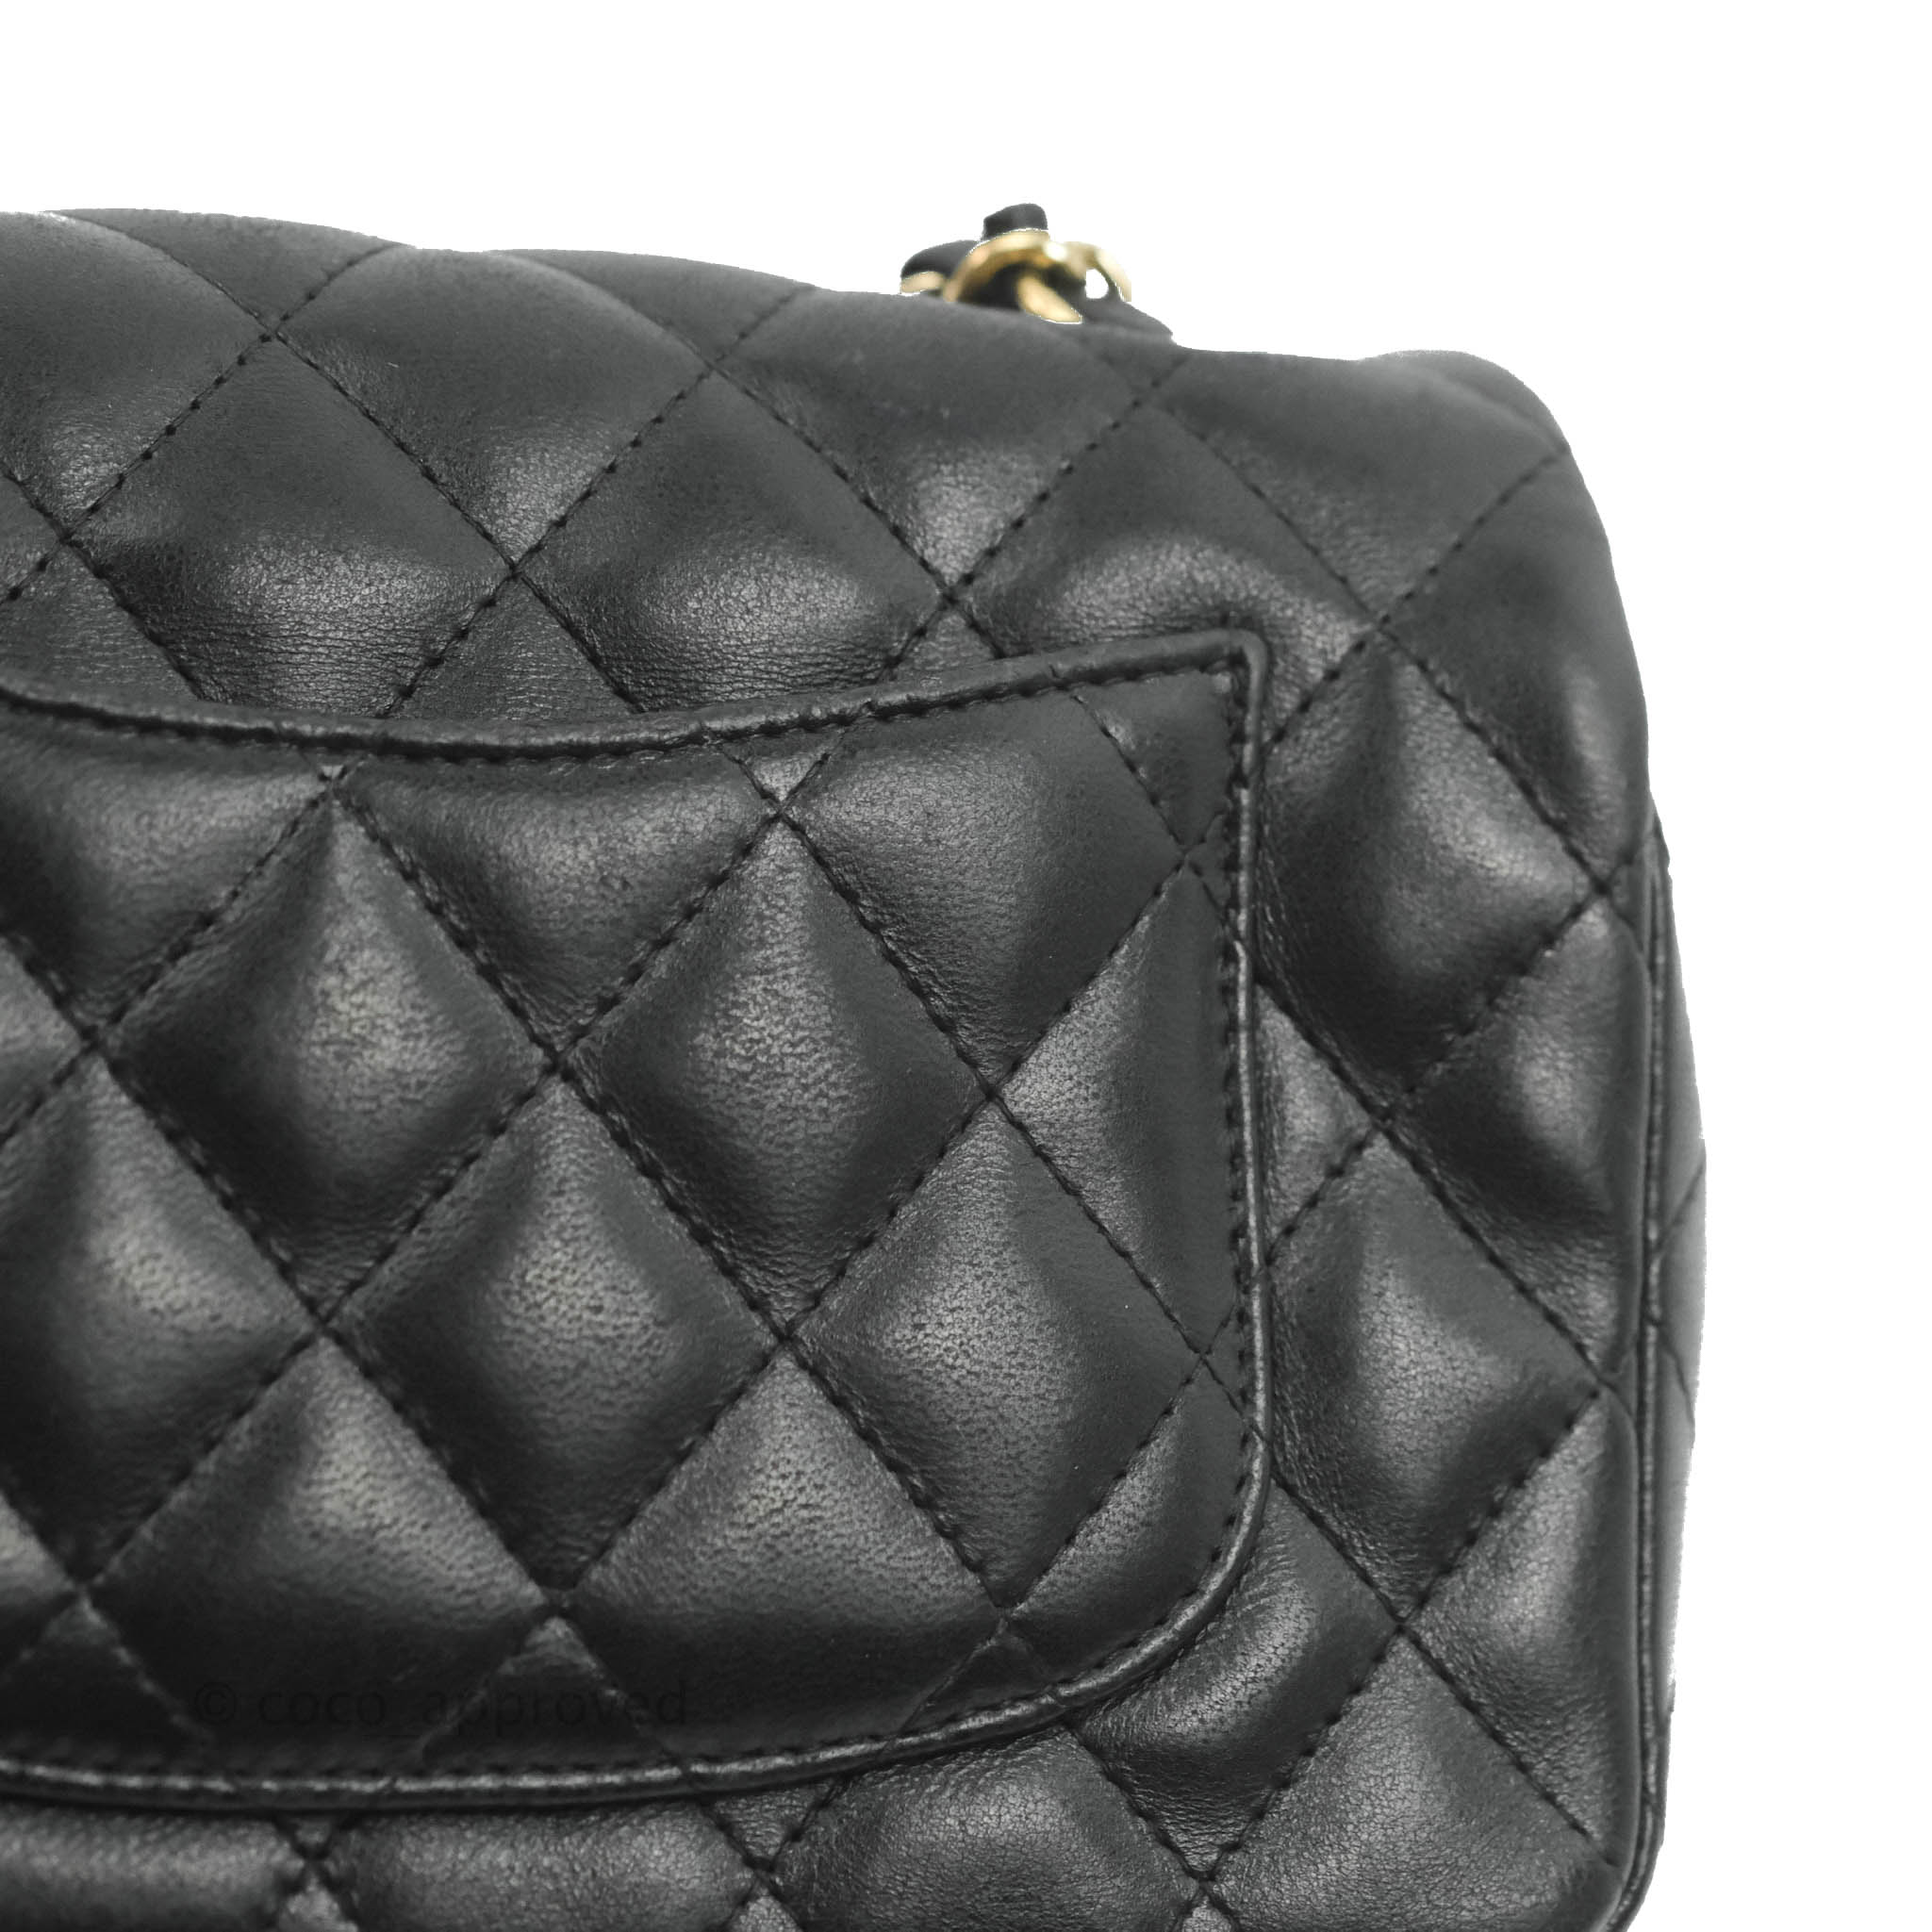 Chanel Mini Rectangular Flap Bag Valentine Limited Edition Black Lambs –  Coco Approved Studio